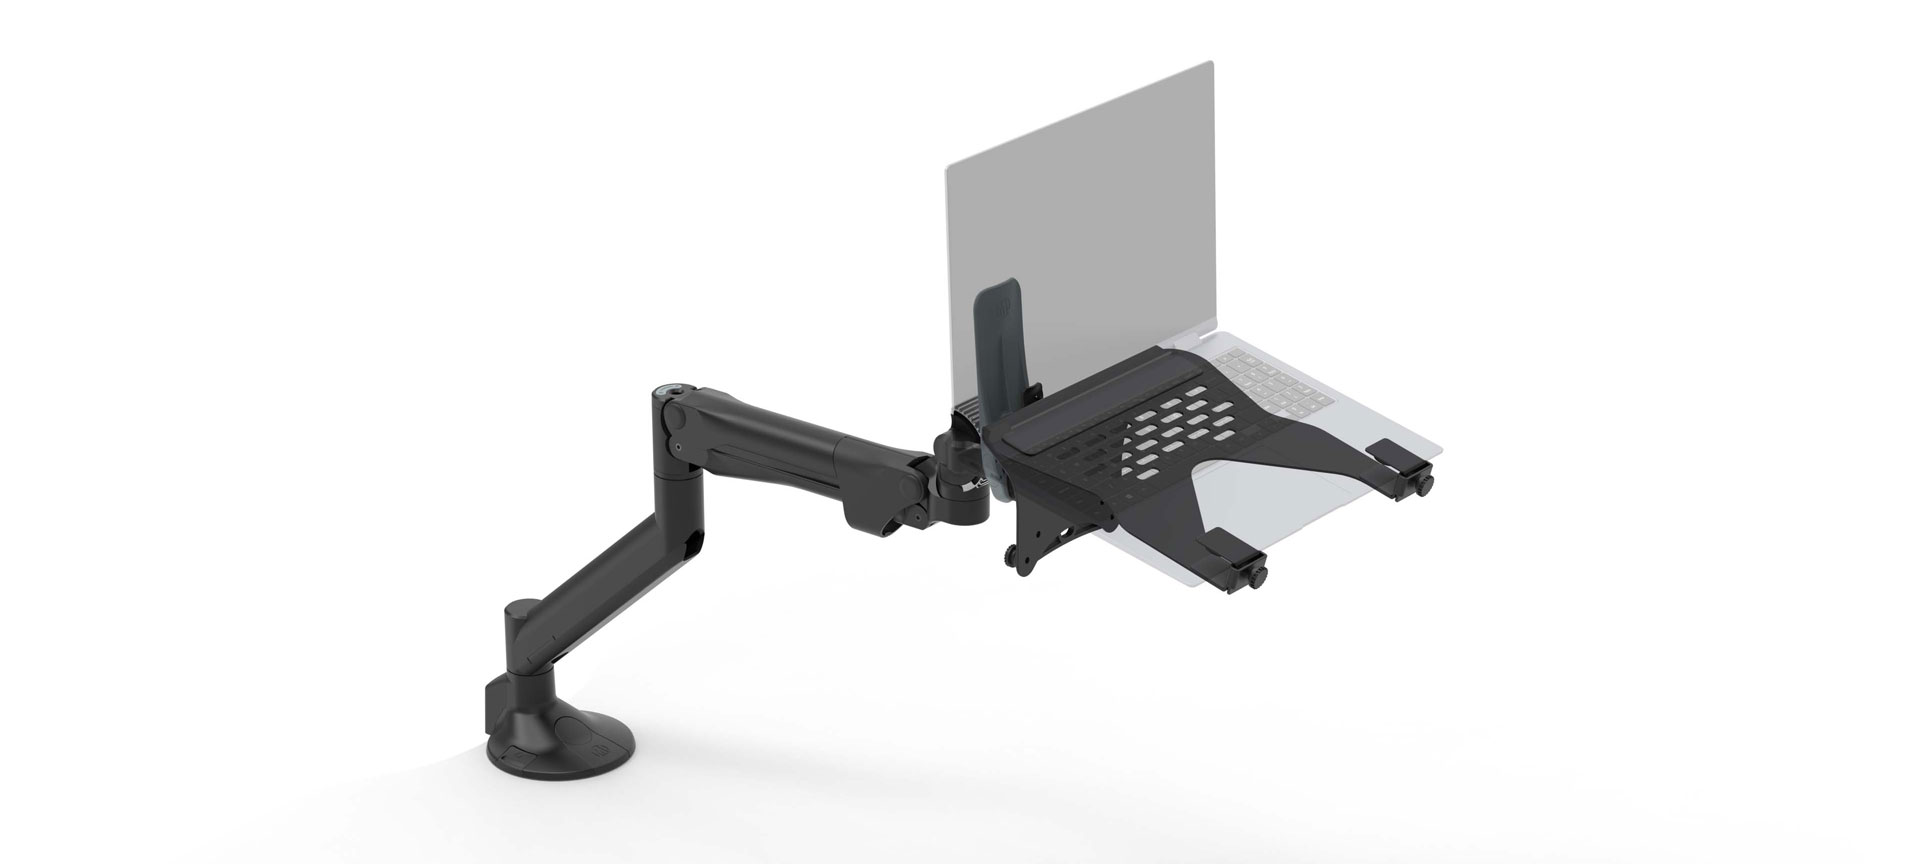 Metalicon Laptop holder with Levo monitor arm